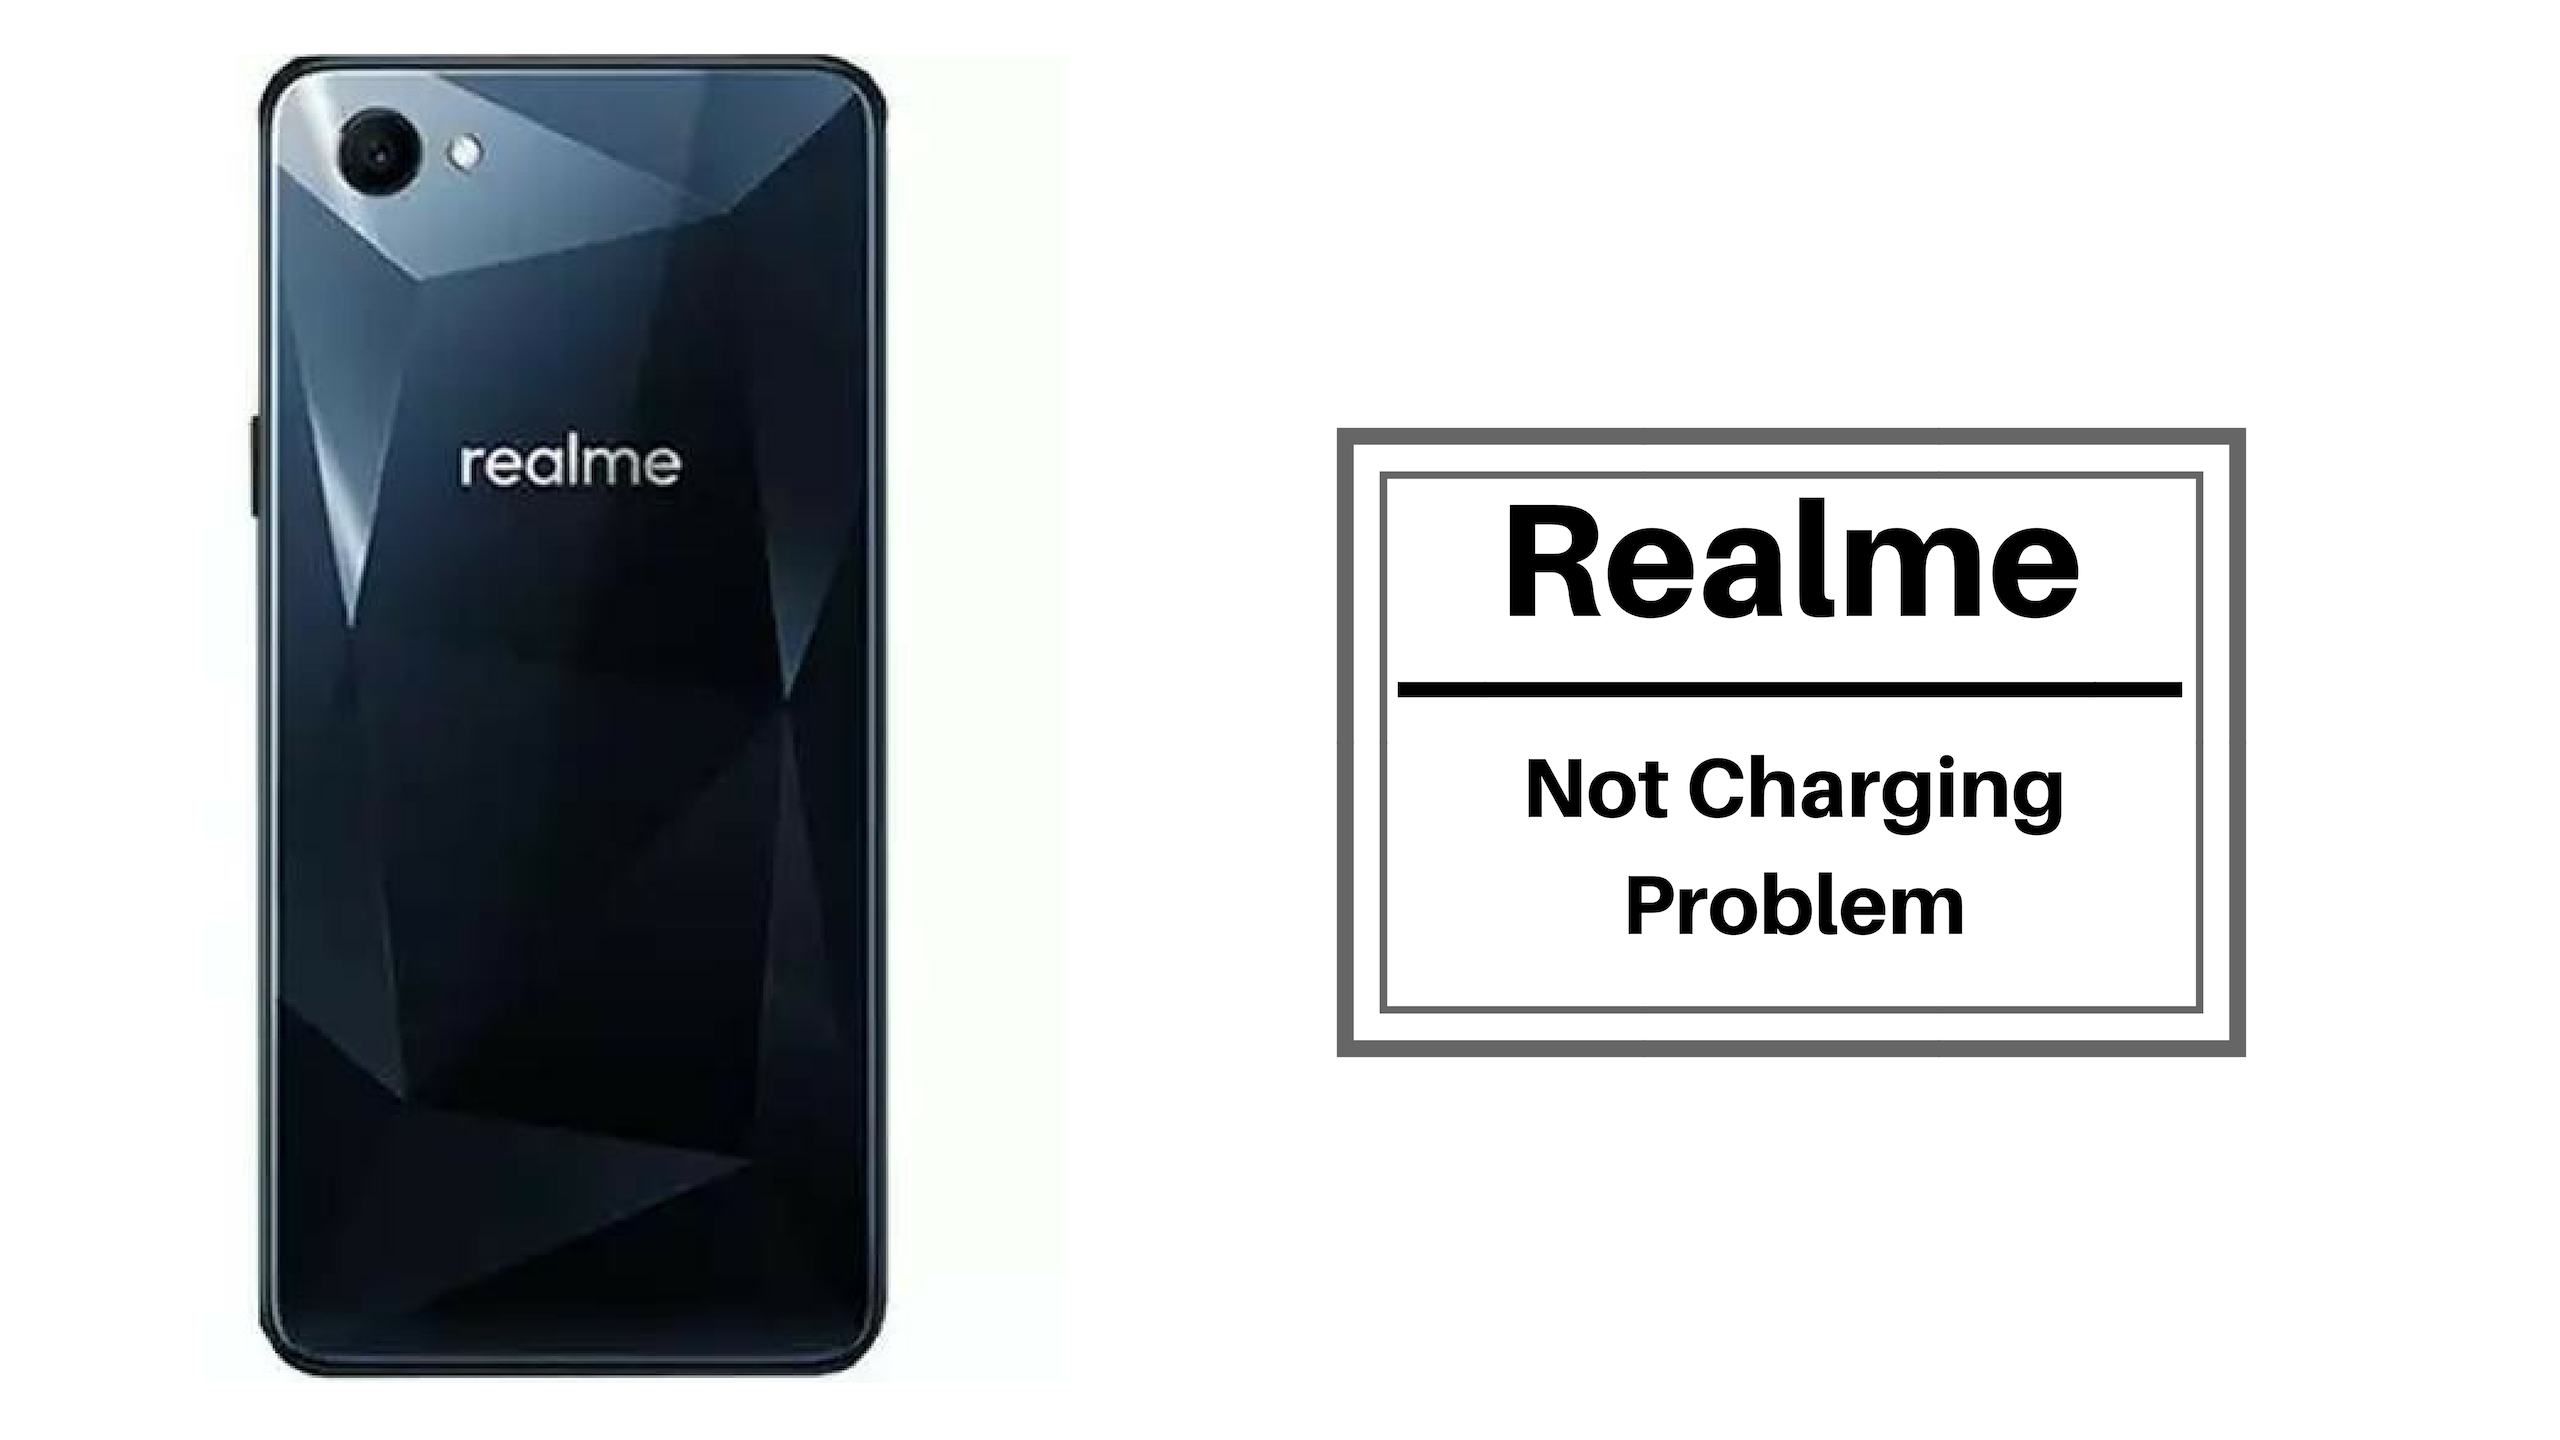 How To Fix the Realme Not Charging Problem [Troubleshoot]